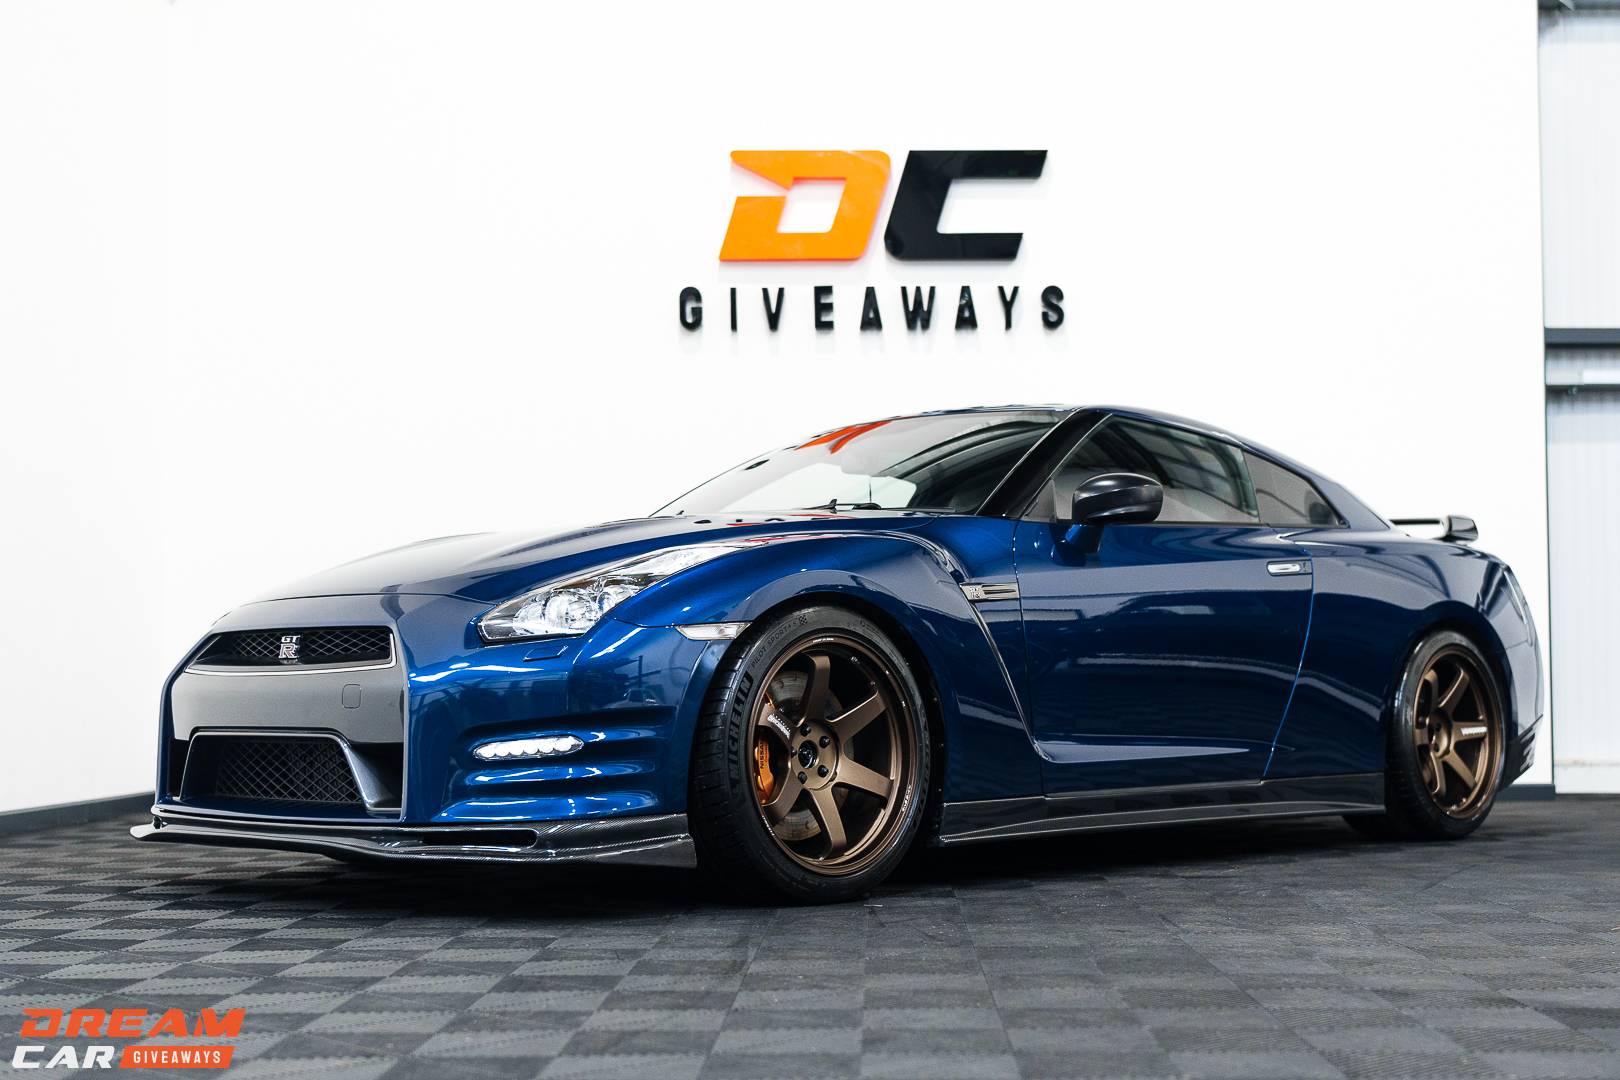 Win this Nissan R35 GTR LM800